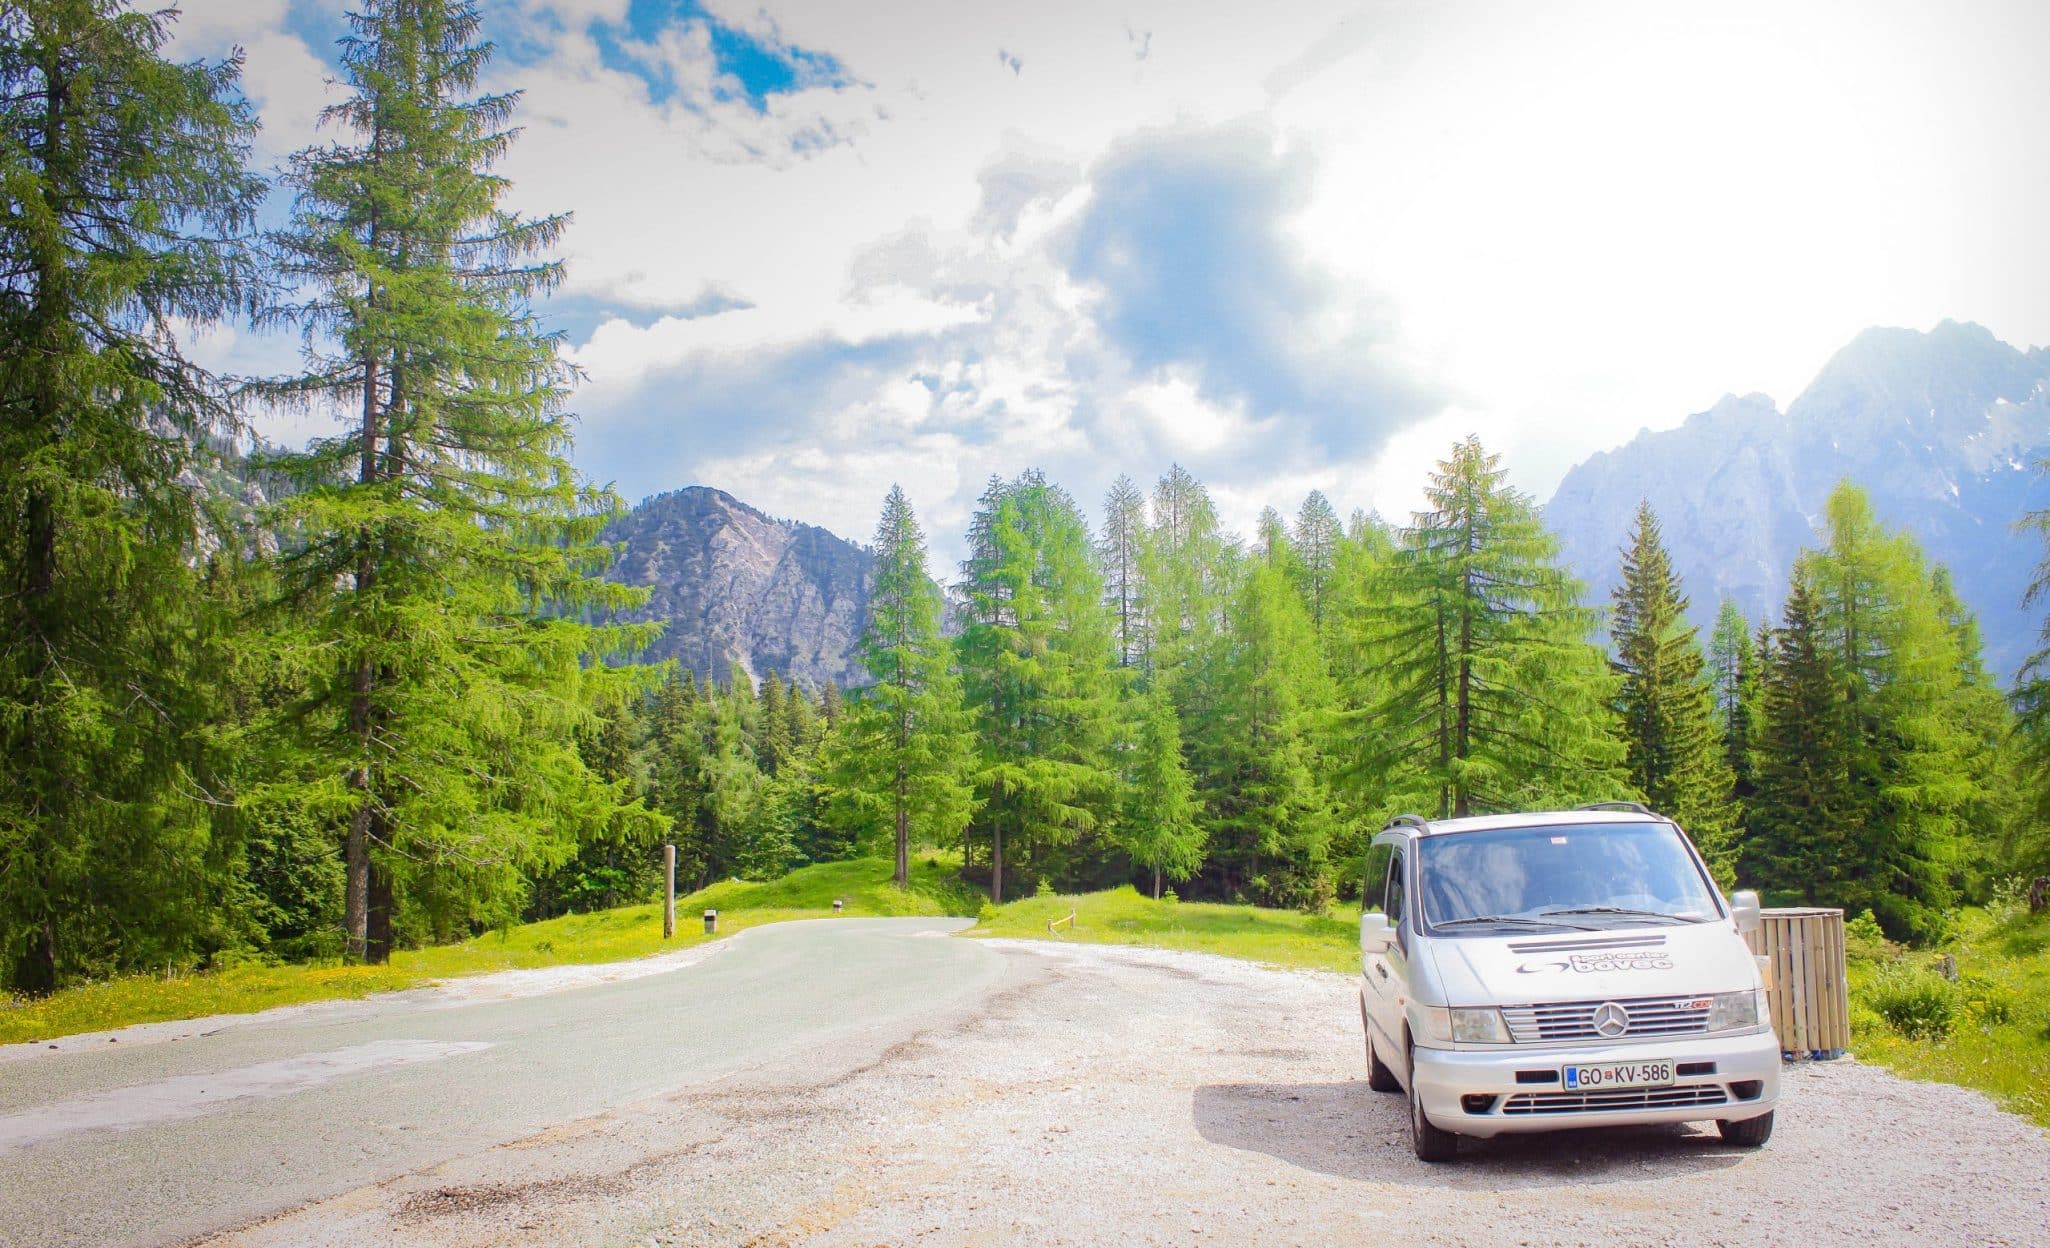 How to find reliable car rental in Ljubljana (+ Slovenia road trip itinerary)